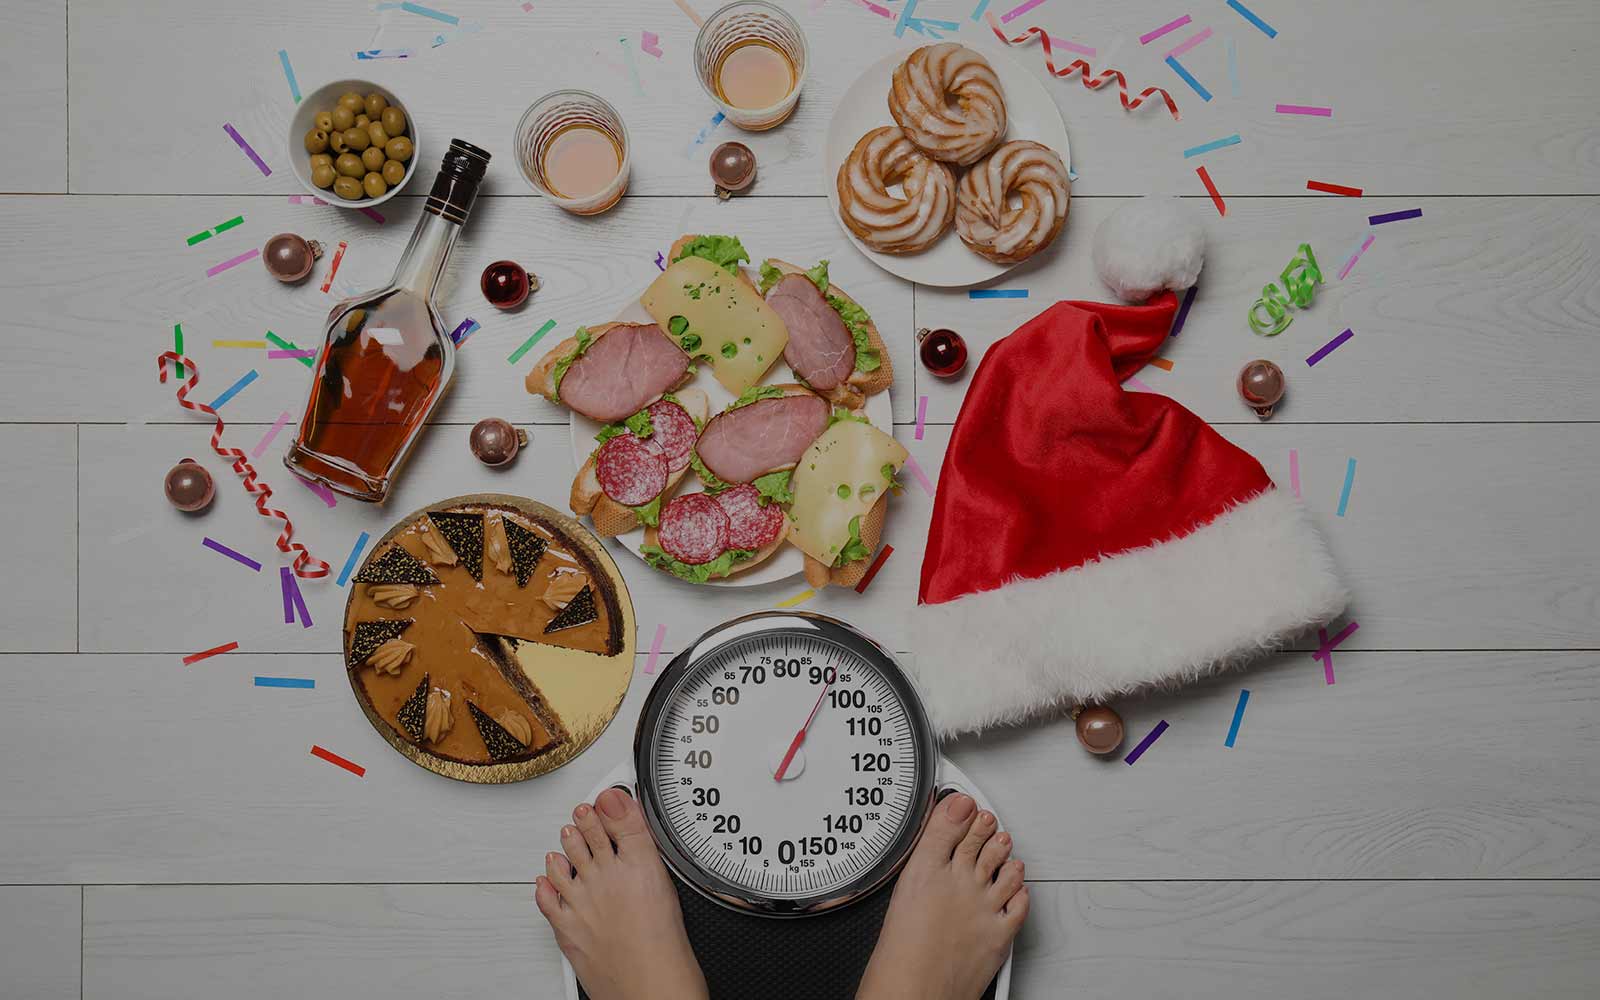 WEBINAR: How to NOT Gain Weight During the Holidays - Nutracelle